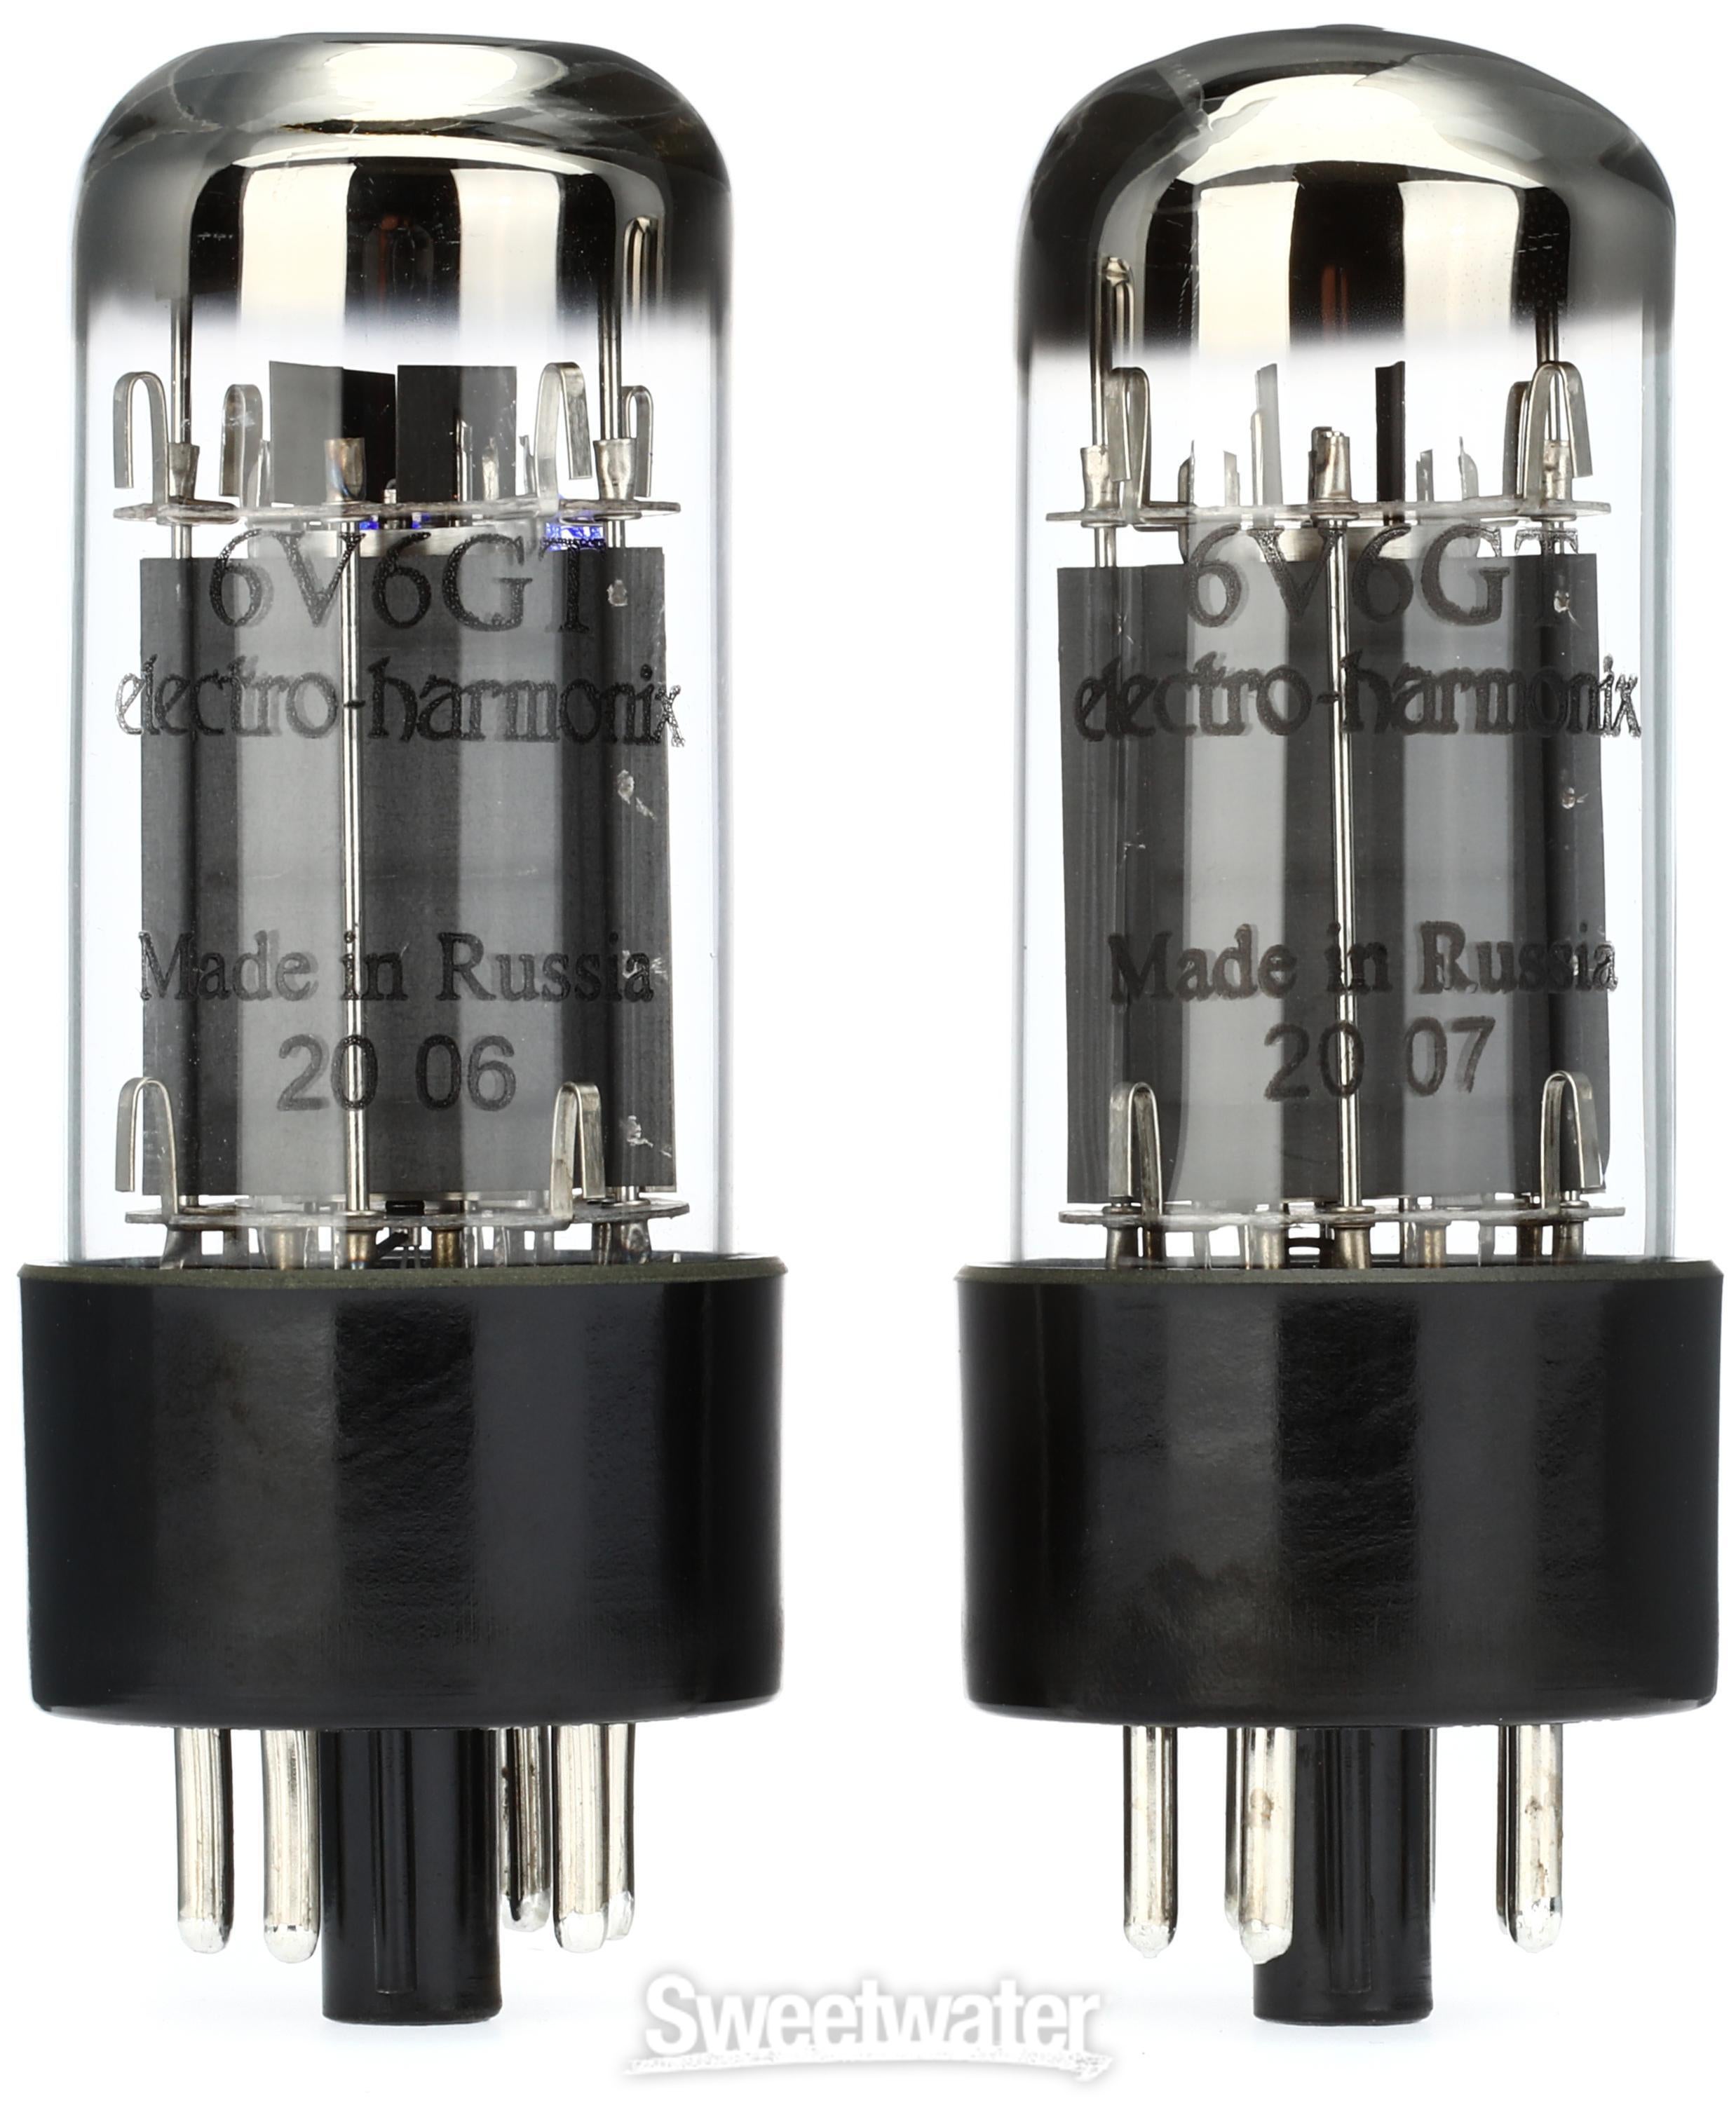 Electro-Harmonix 6V6EH Power Tubes - Matched Duet | Sweetwater